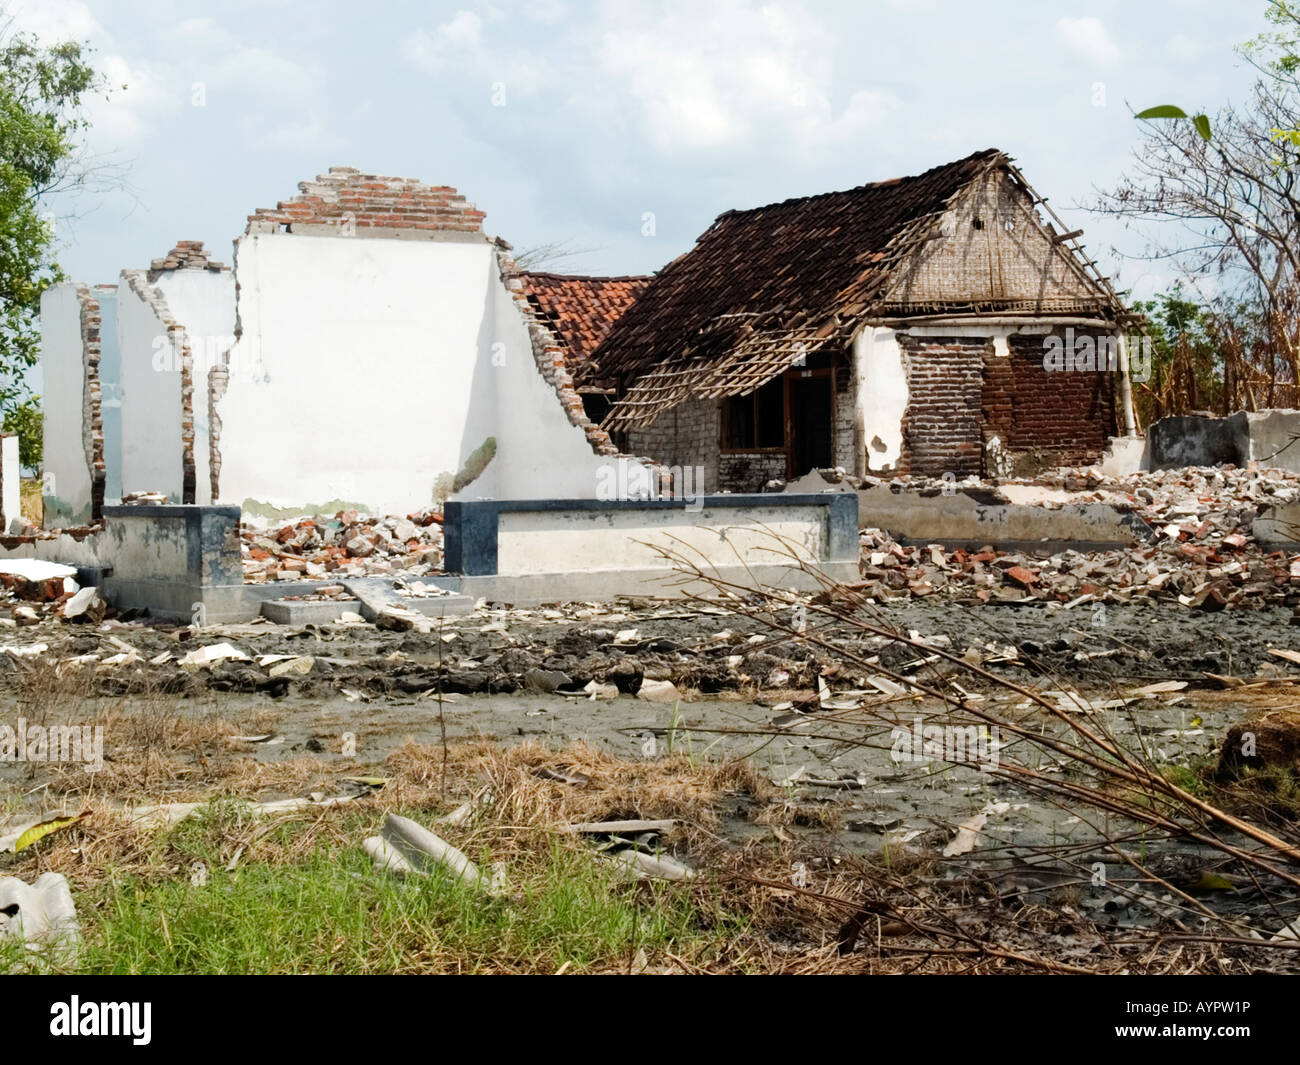 Derelict abandoned house at the edge of the hot mud disaster,Sidoarjo,East Java,Indonesia. Stock Photo